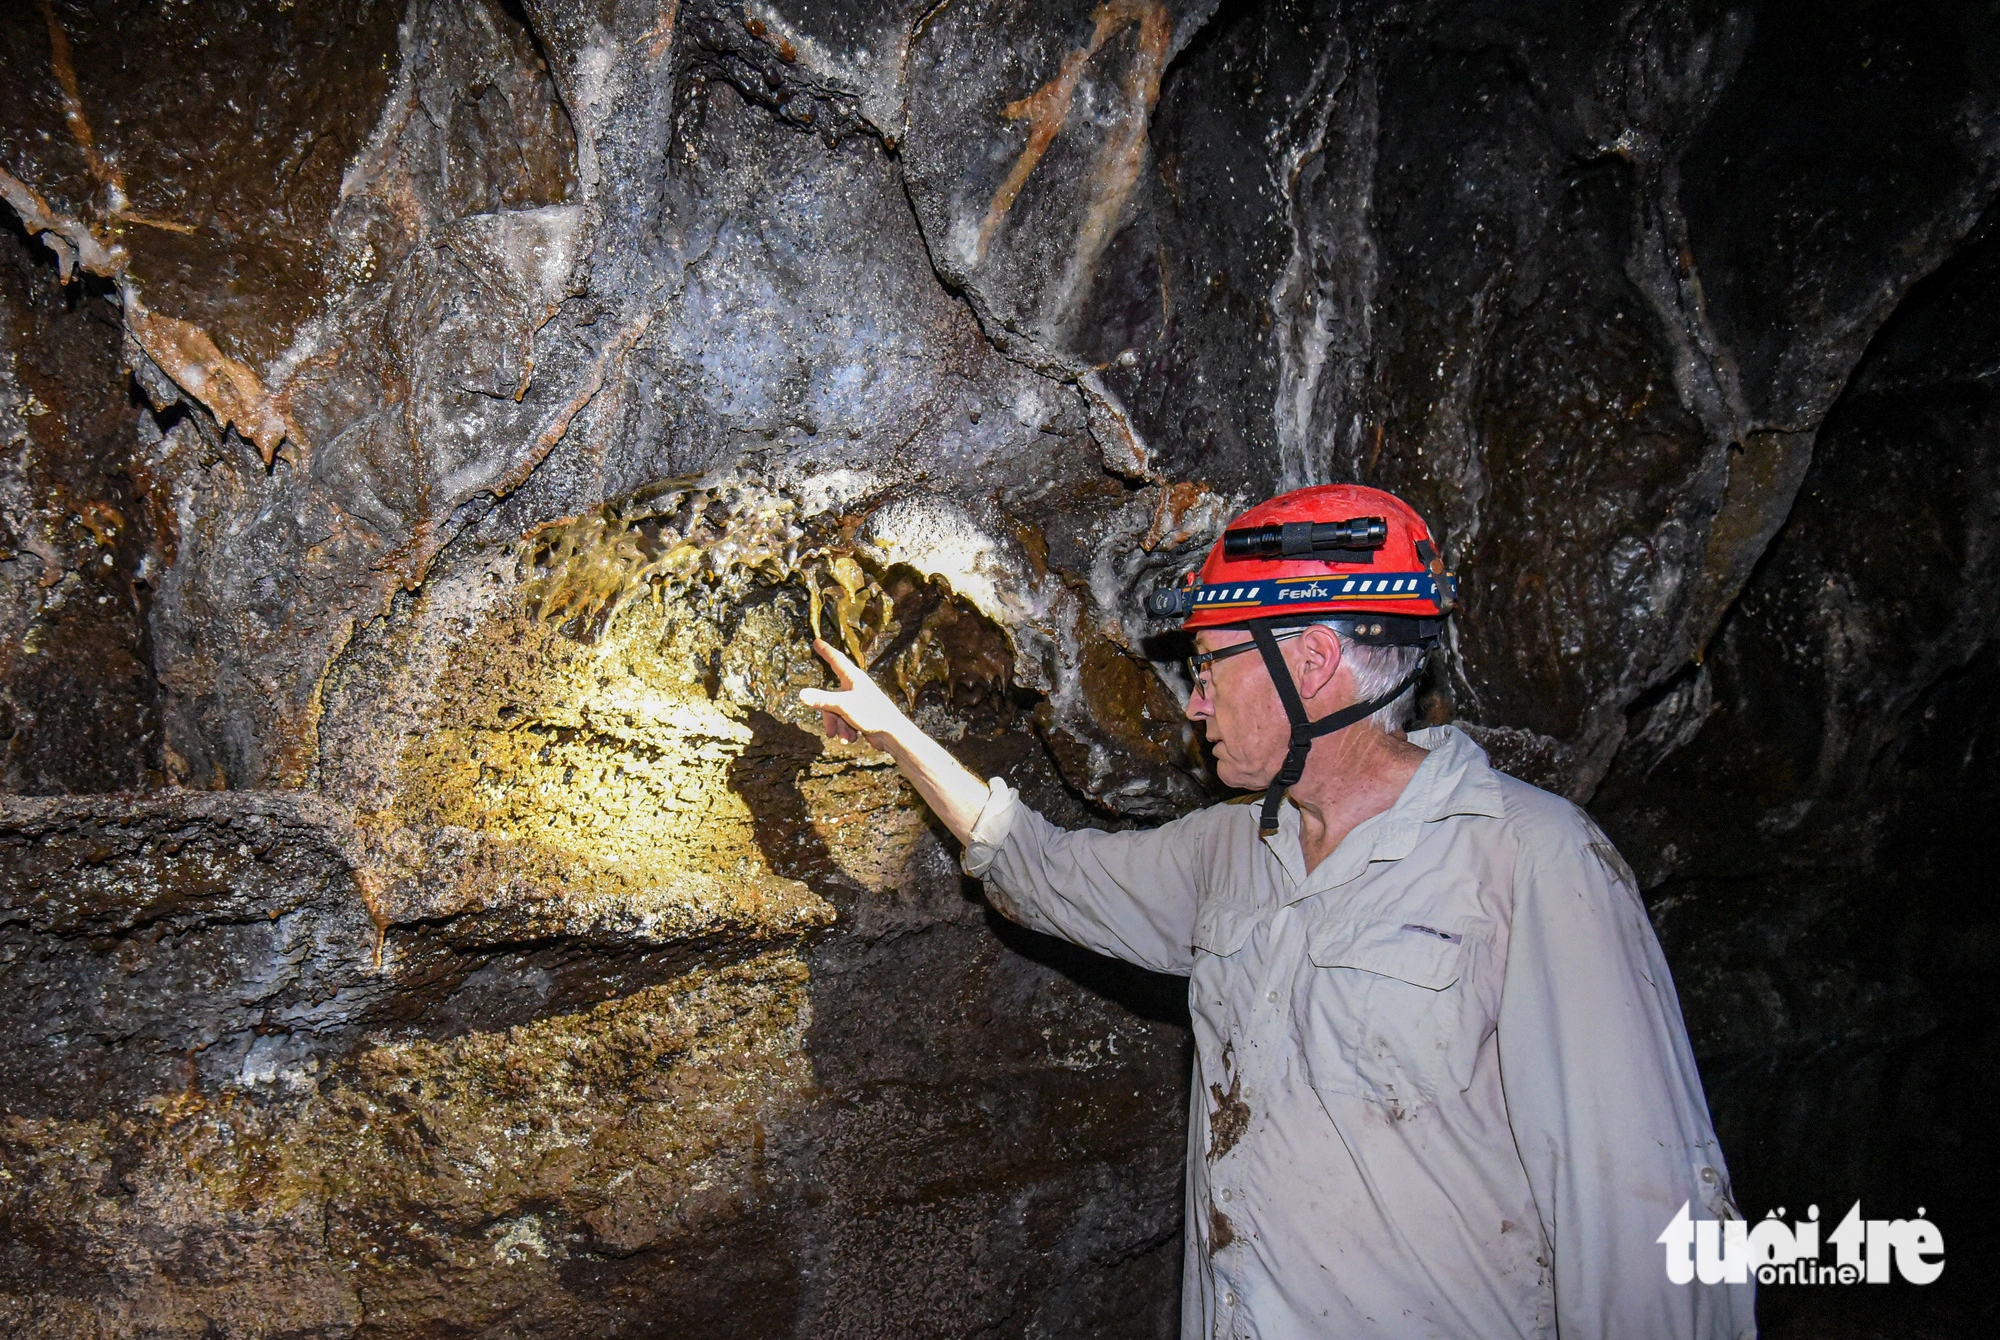 The volcanic cavern system in Dak Nong Province in Vietnam’s Central Highlands region boasts unique geological features and shapes. Photo: Tuoi Tre